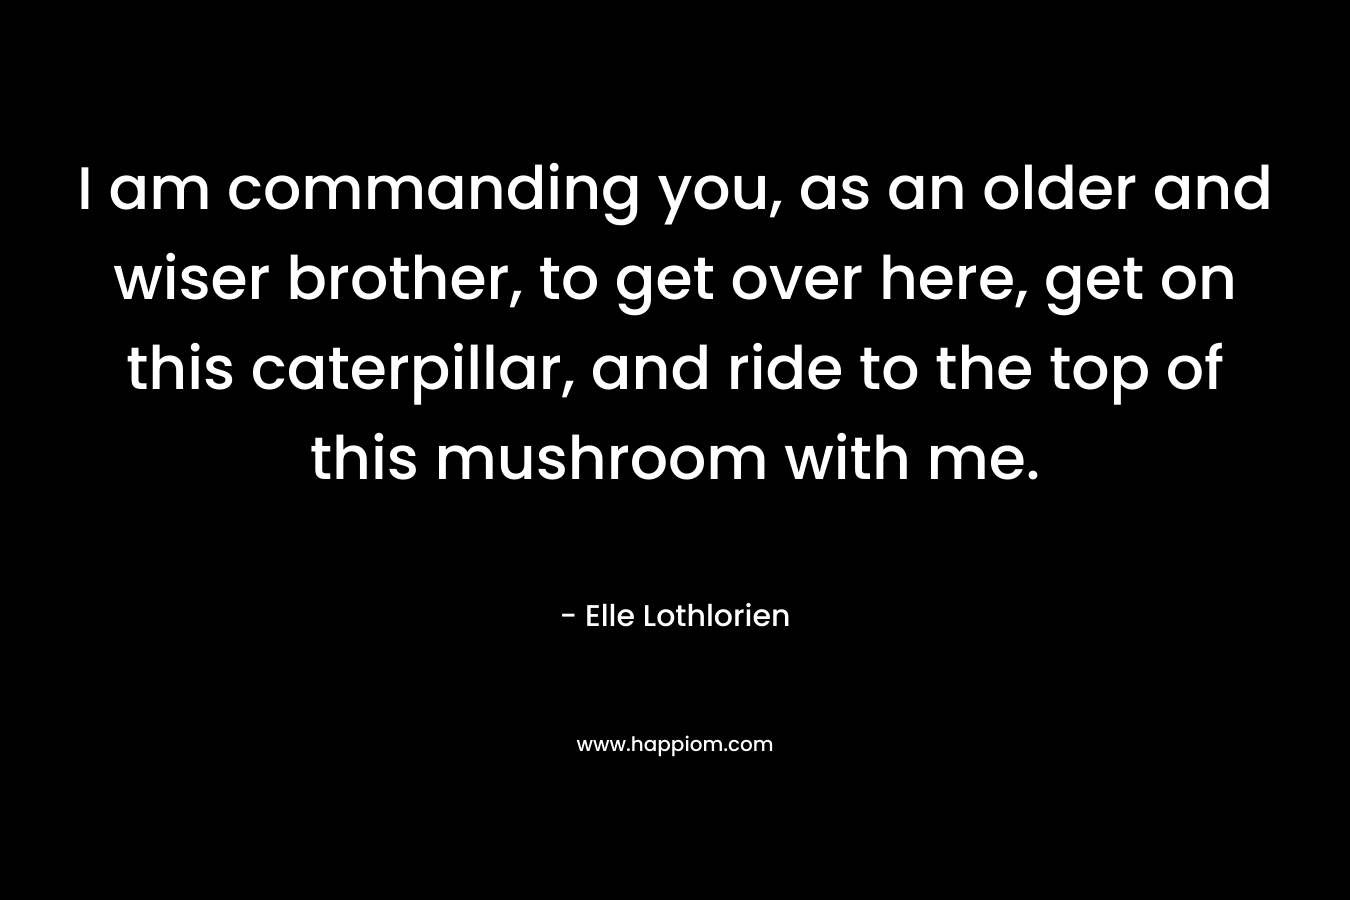 I am commanding you, as an older and wiser brother, to get over here, get on this caterpillar, and ride to the top of this mushroom with me. – Elle Lothlorien